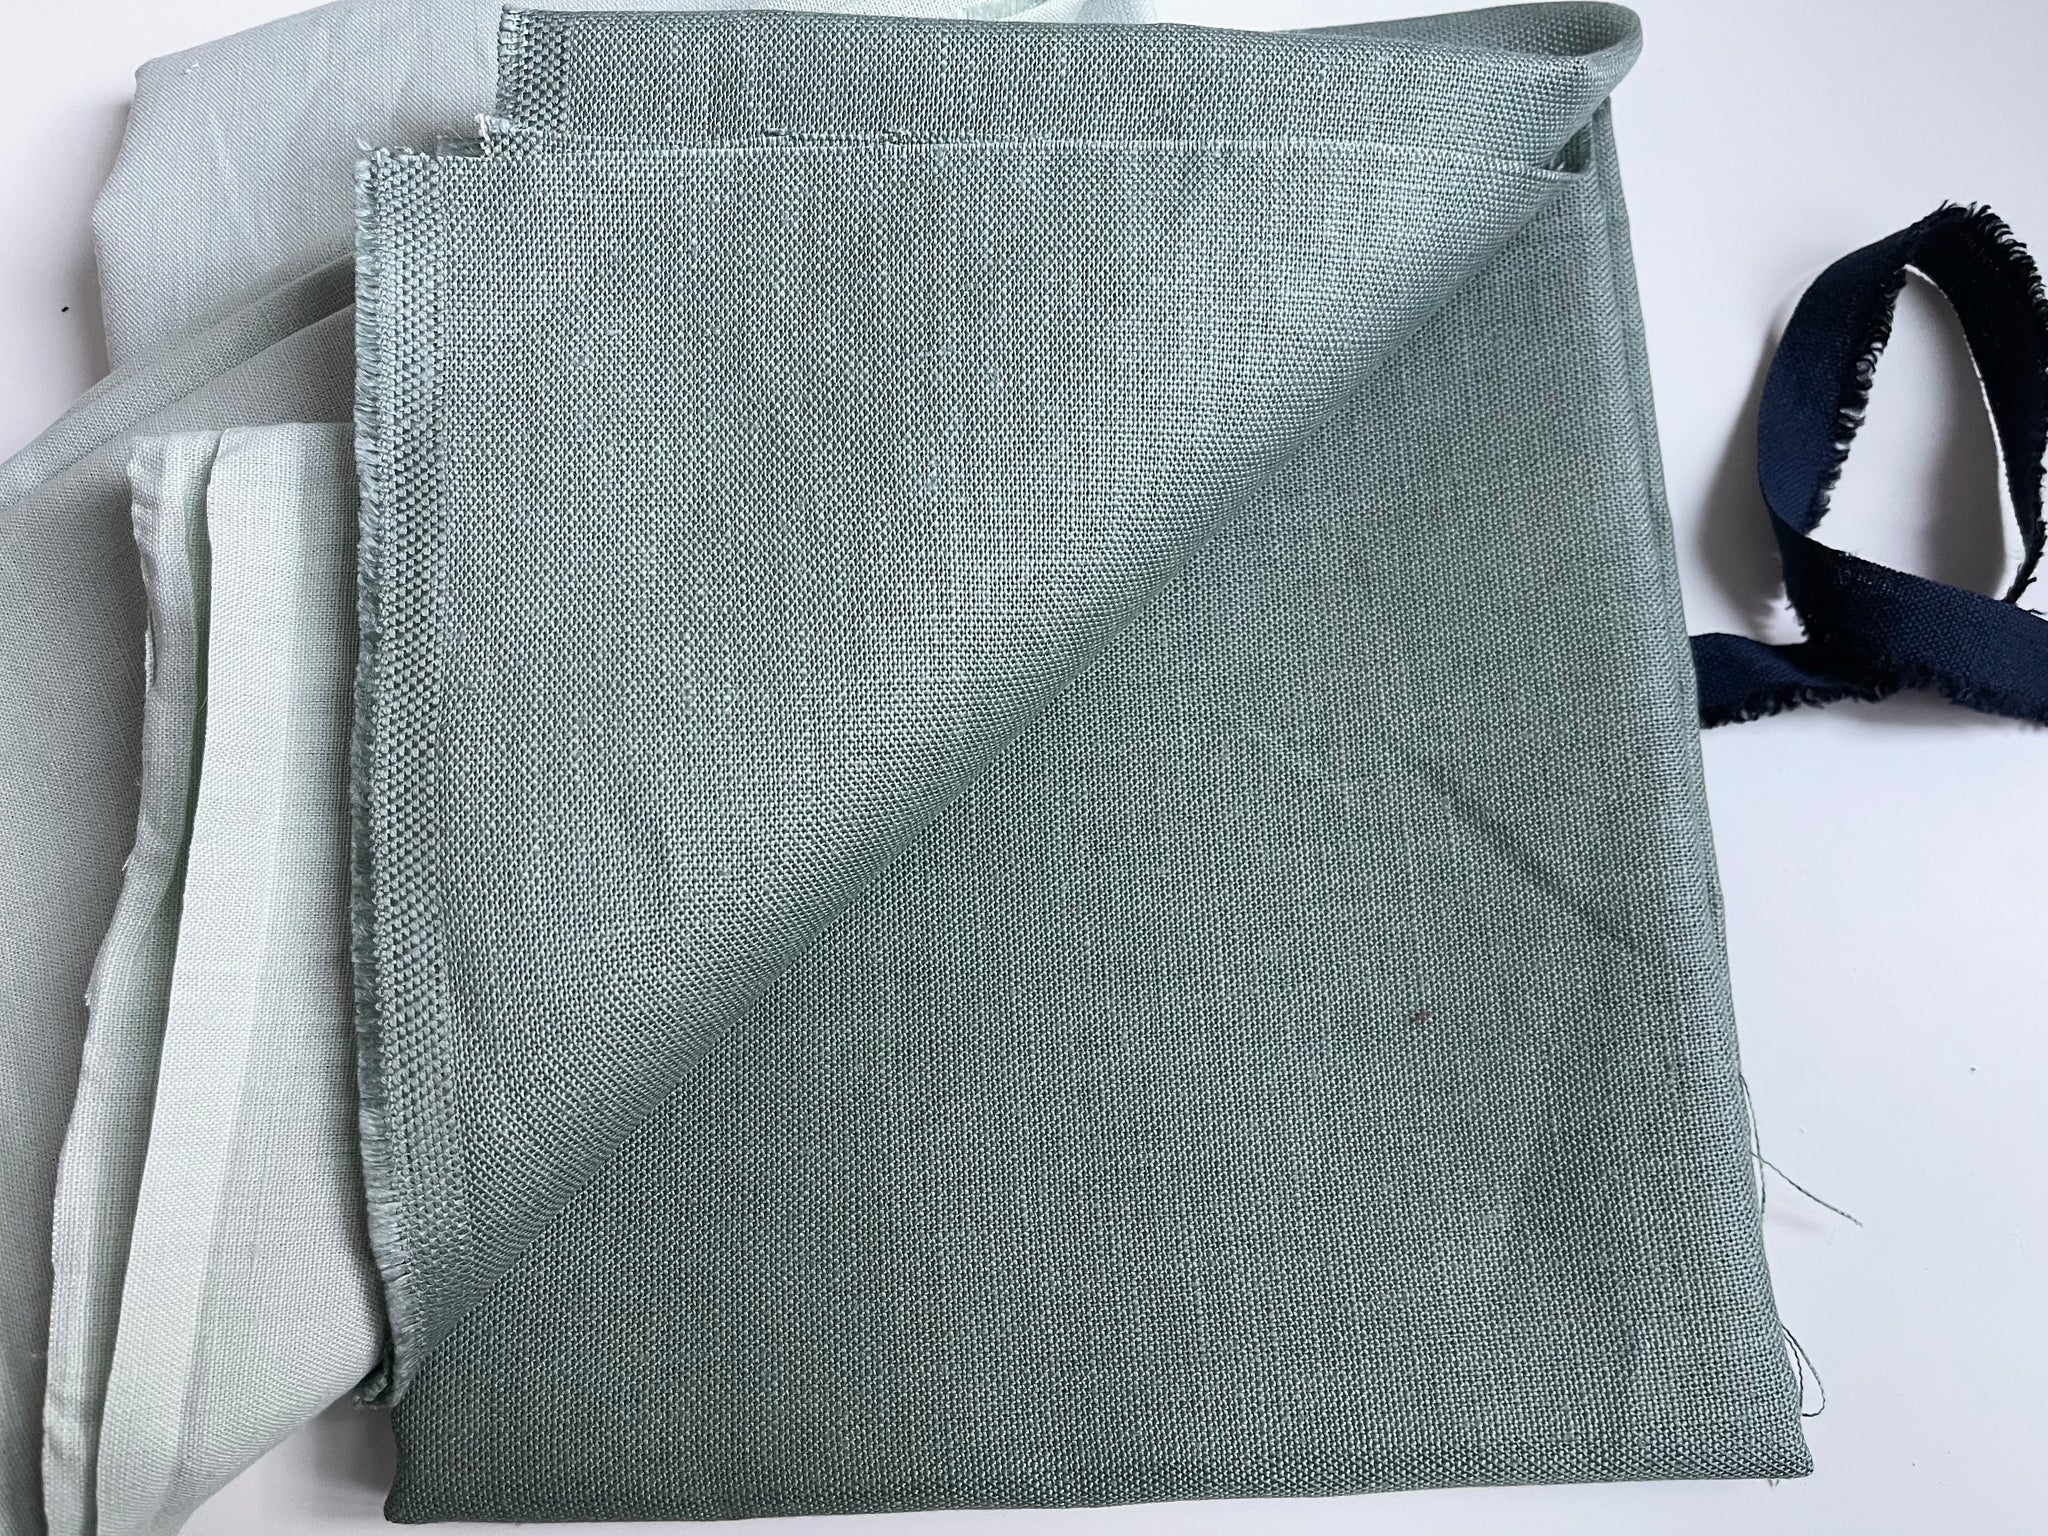 Linen Fabric Remnants - Green Heavy Weight and Sea Glass